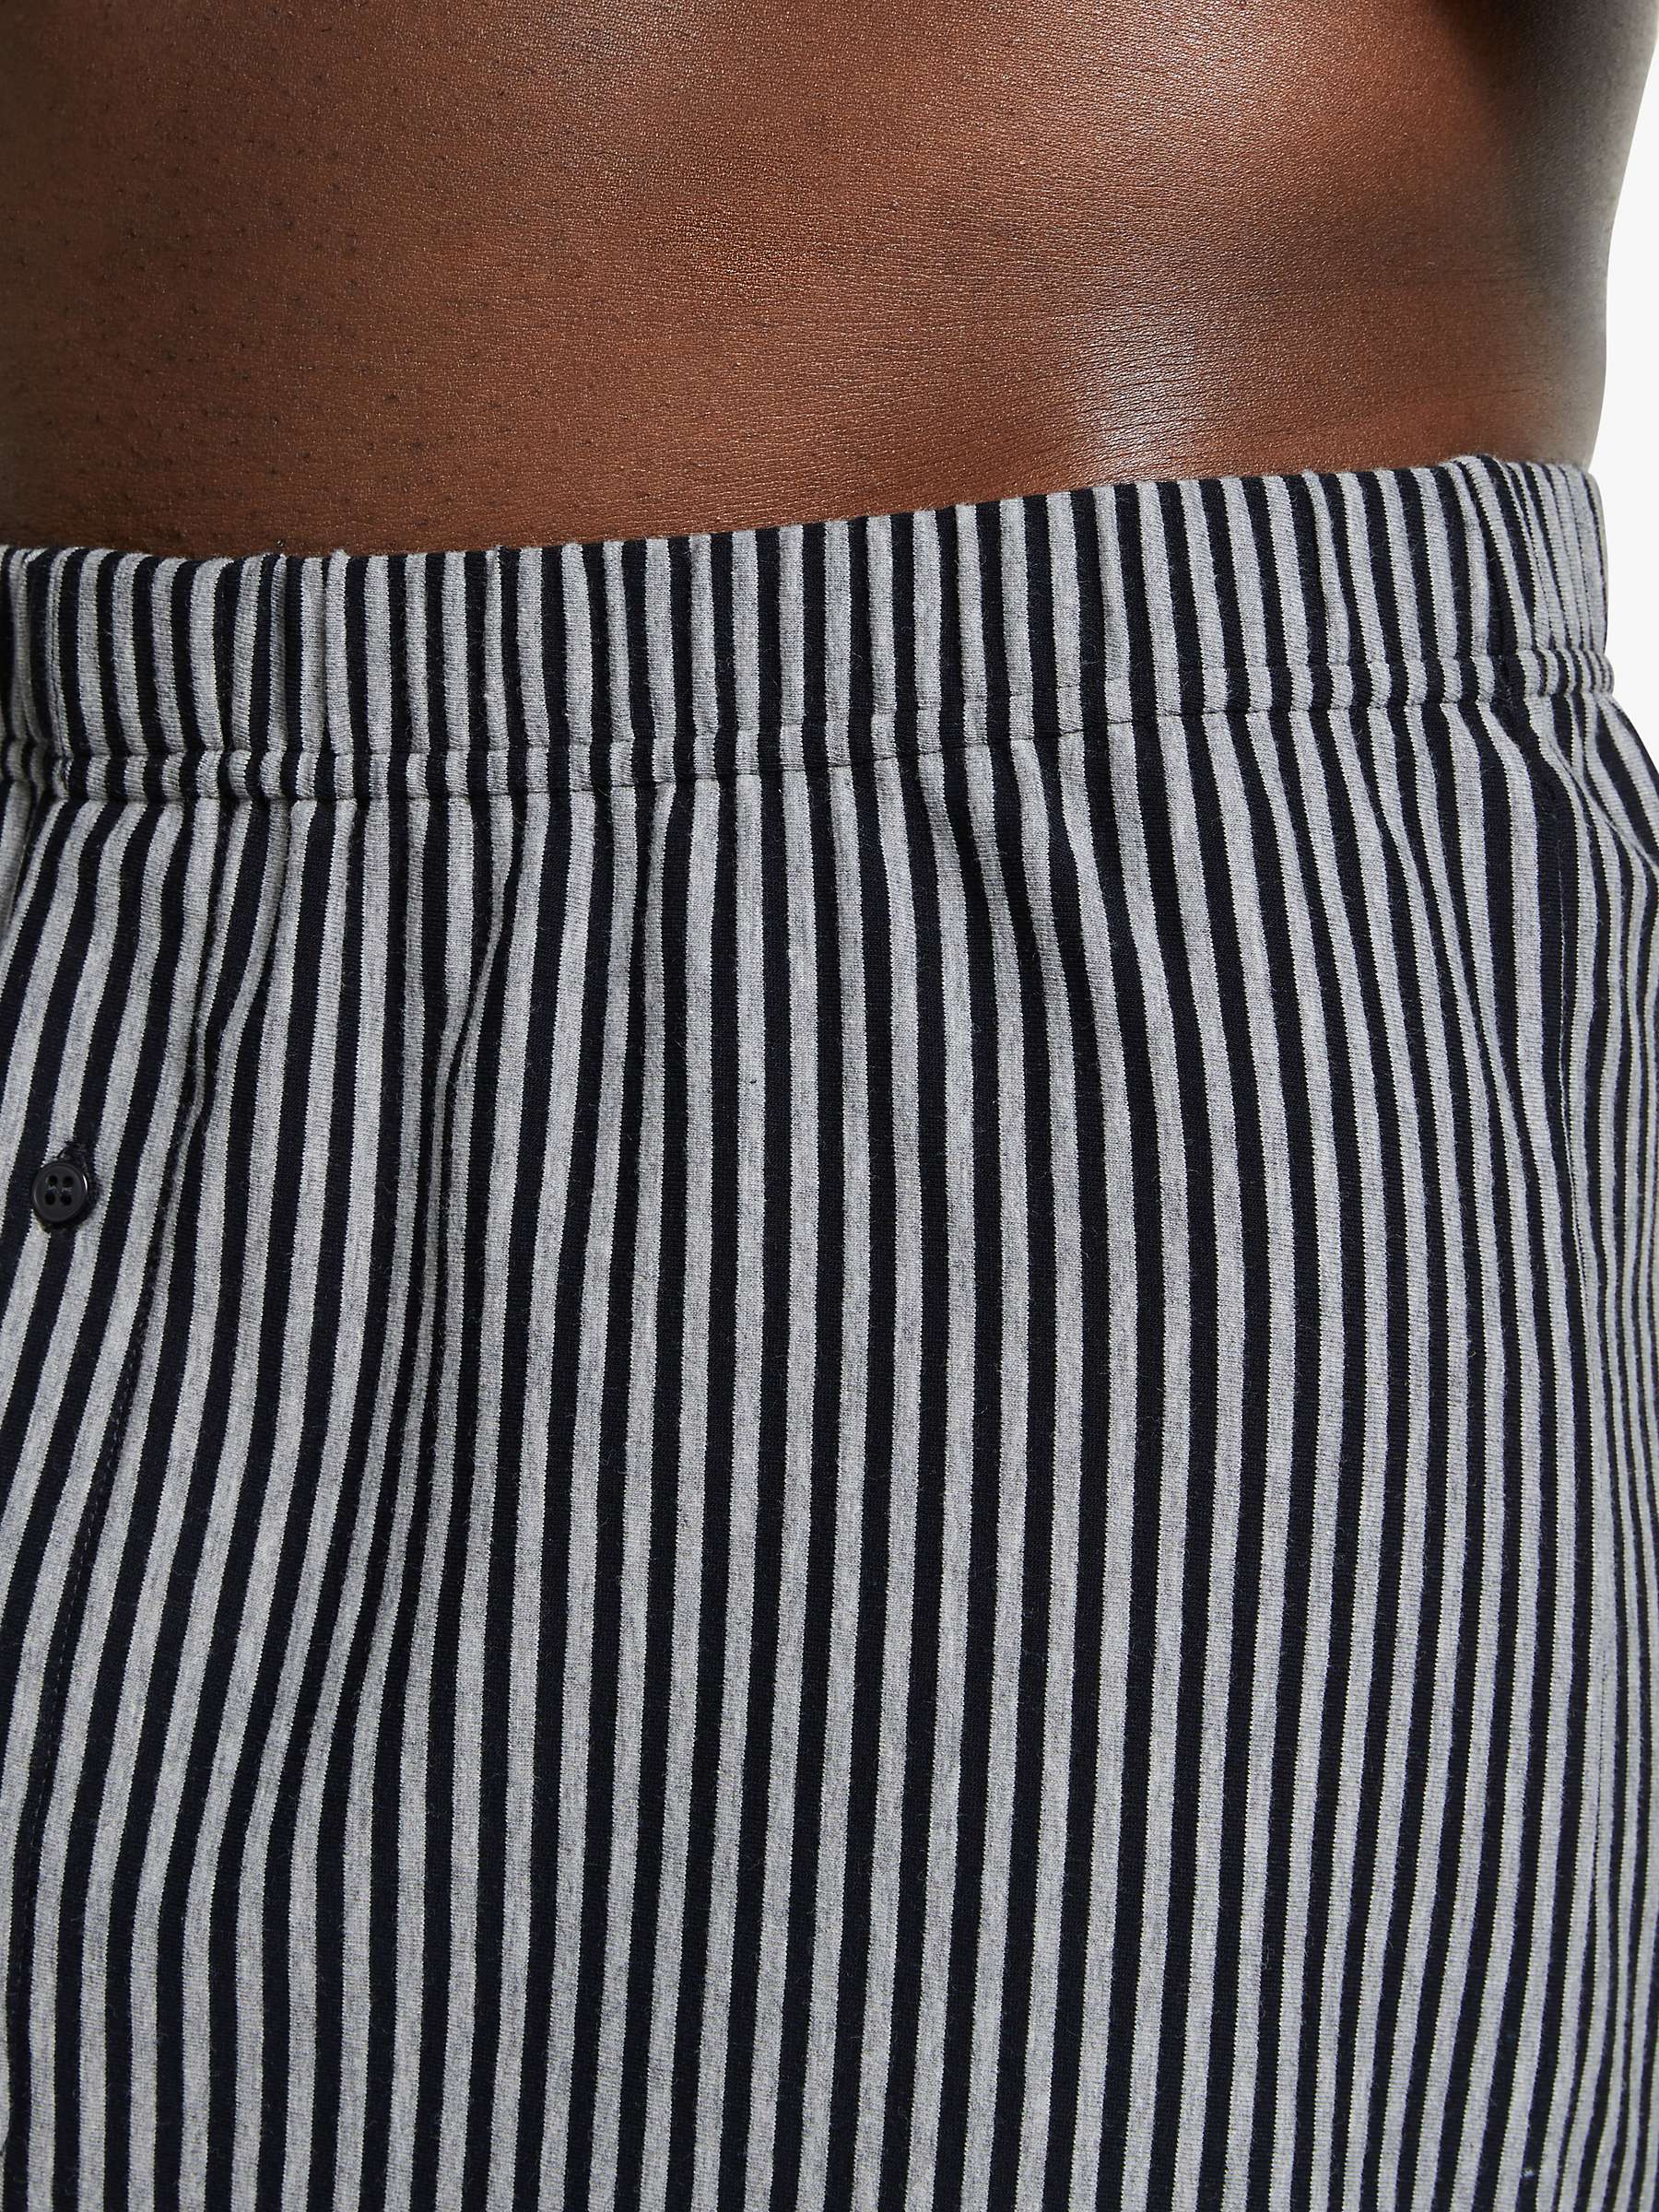 Buy John Lewis Organic Cotton Jersey Double Button Boxers, Pack of 3, Black/Grey Online at johnlewis.com